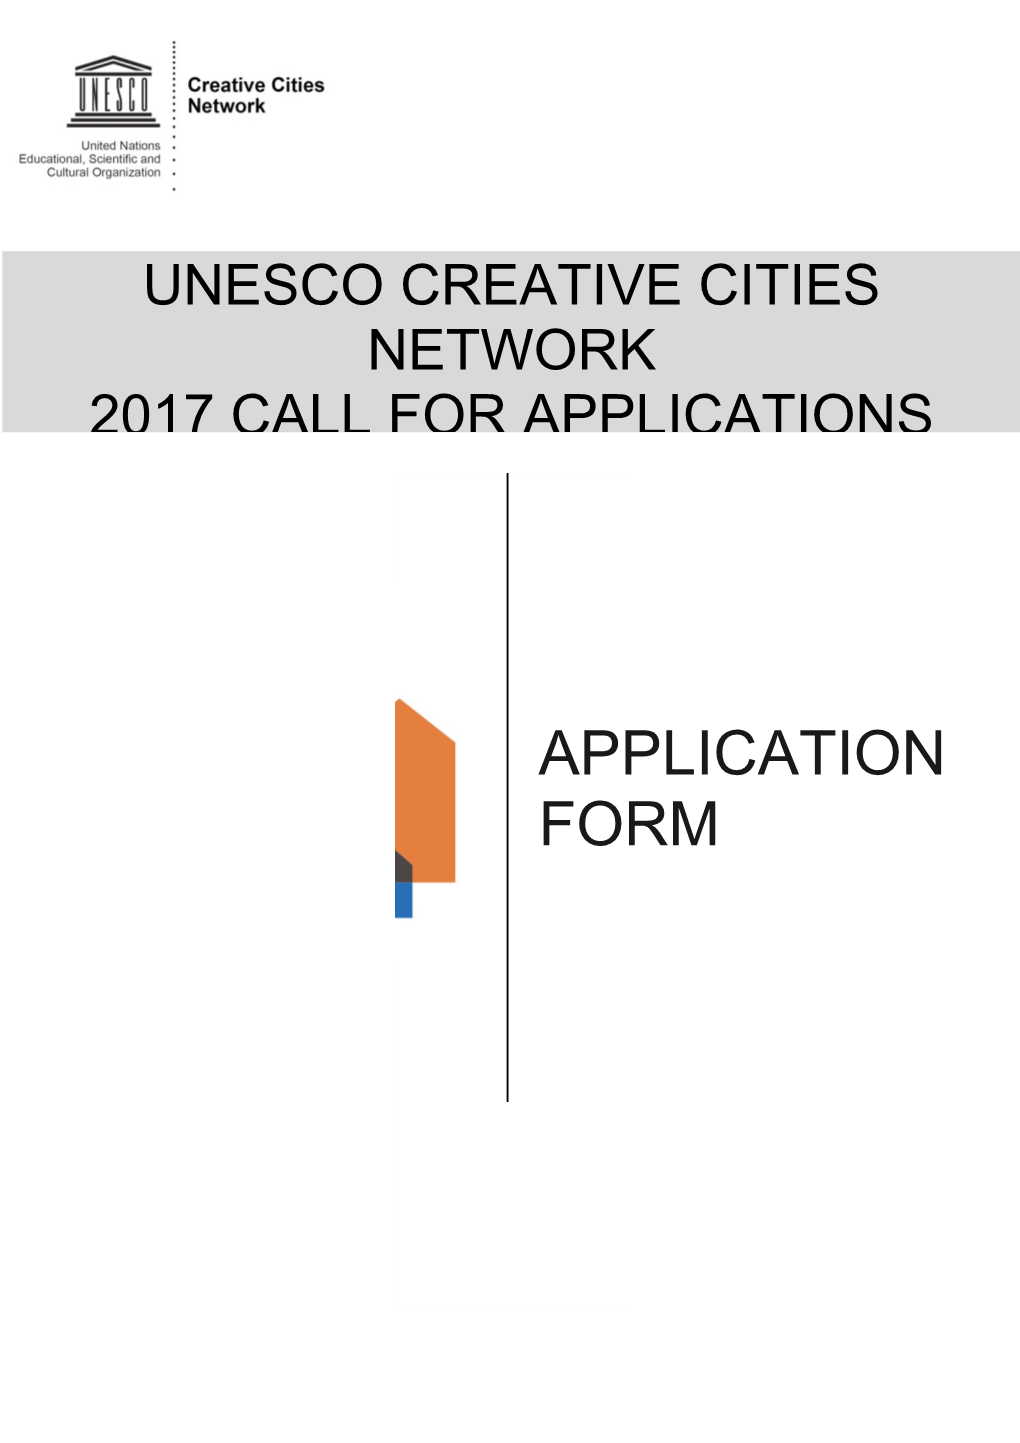 UNESCO Creative Cities Network Call for Nominatins 2015: Application Form and Nomination